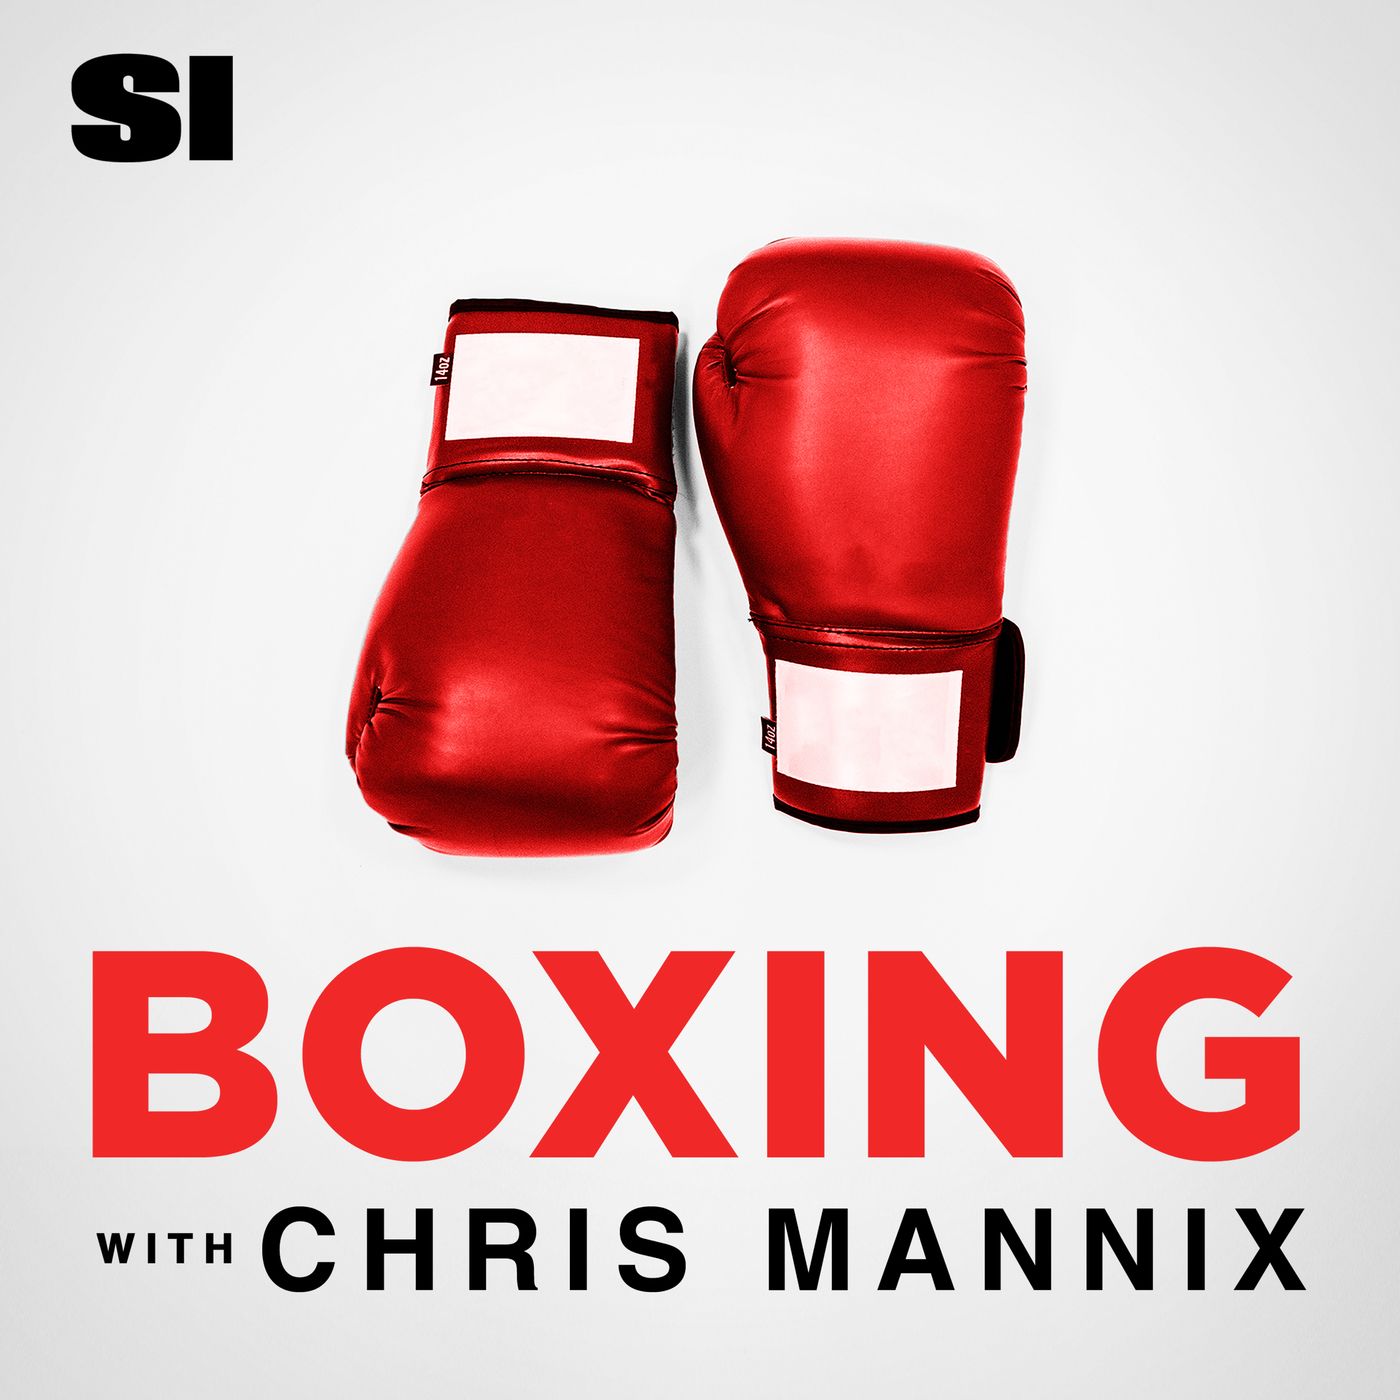 A highlight from Boxing with Chris Mannix - Jake Paul and the State of Boxing